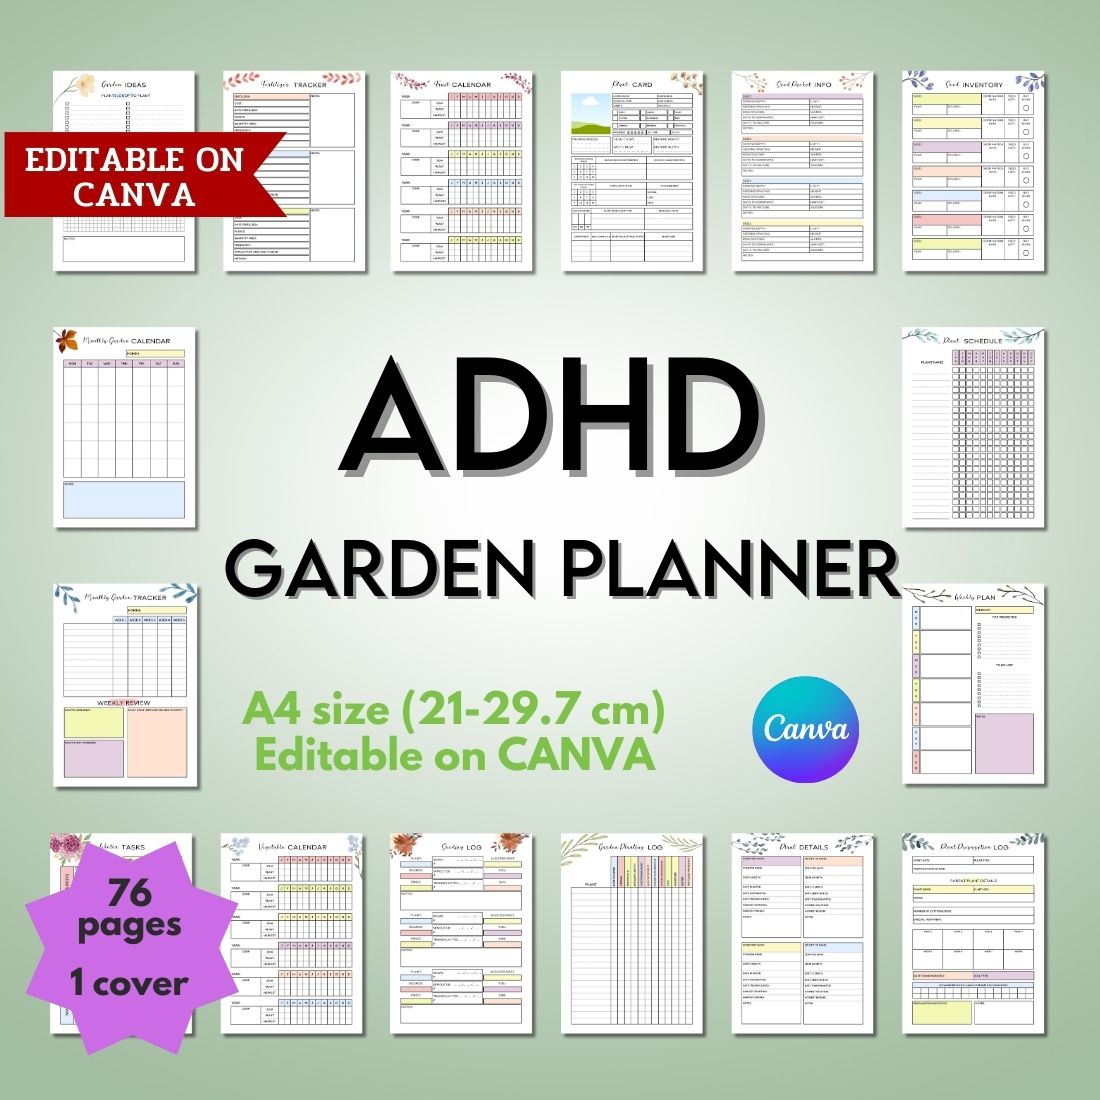 ADHD Garden Planner - Canva Template cover image.